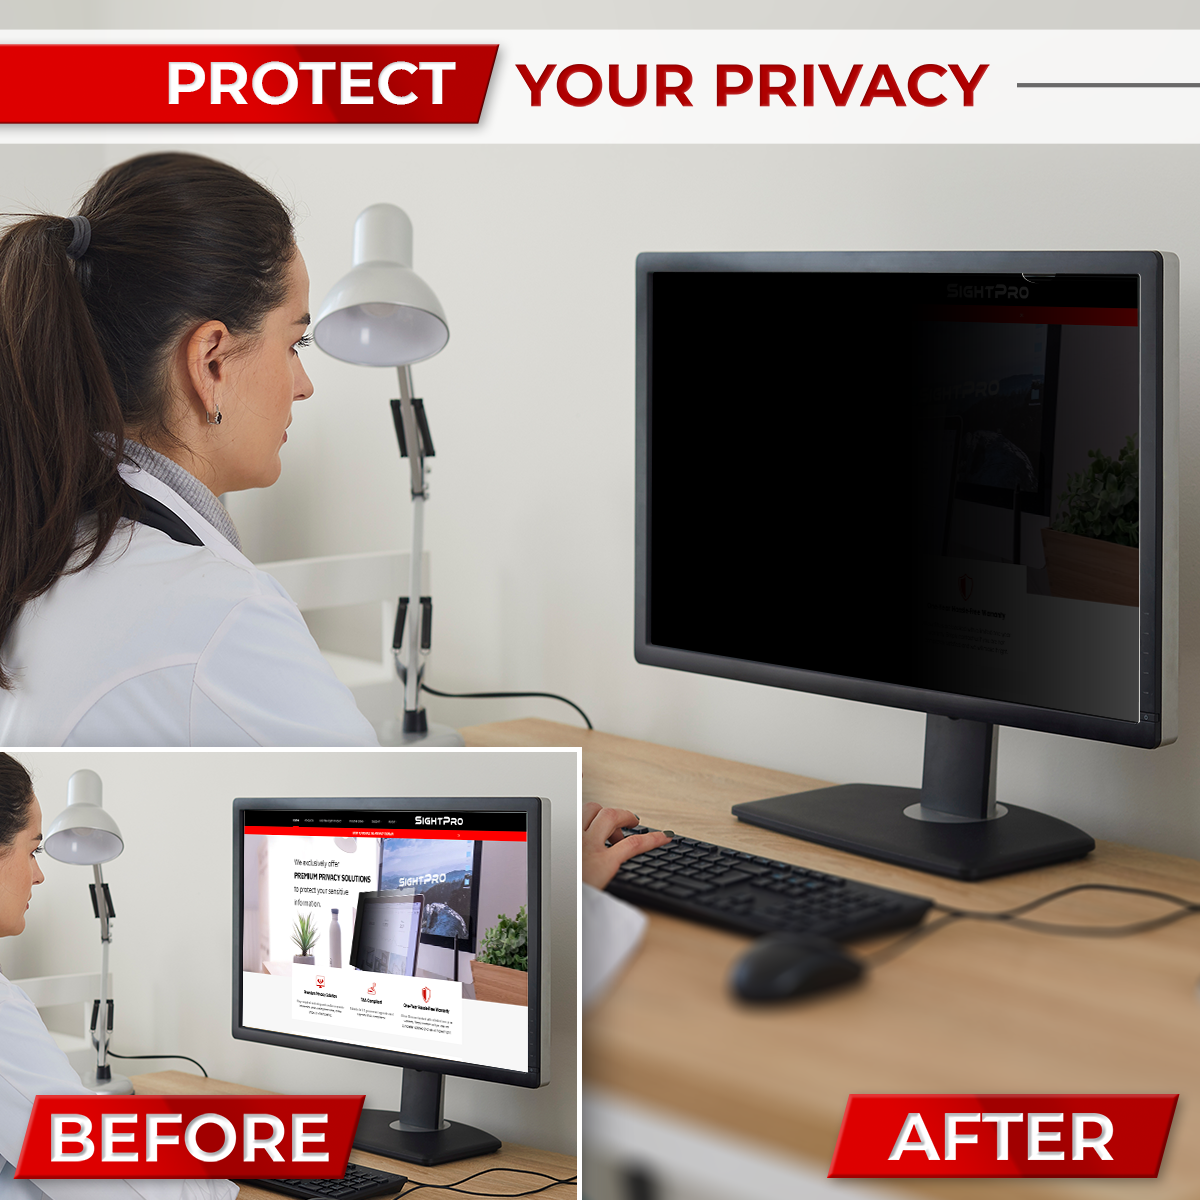 SightPro 26 Inch 16:10 Privacy Screen Filter for Computer Monitors